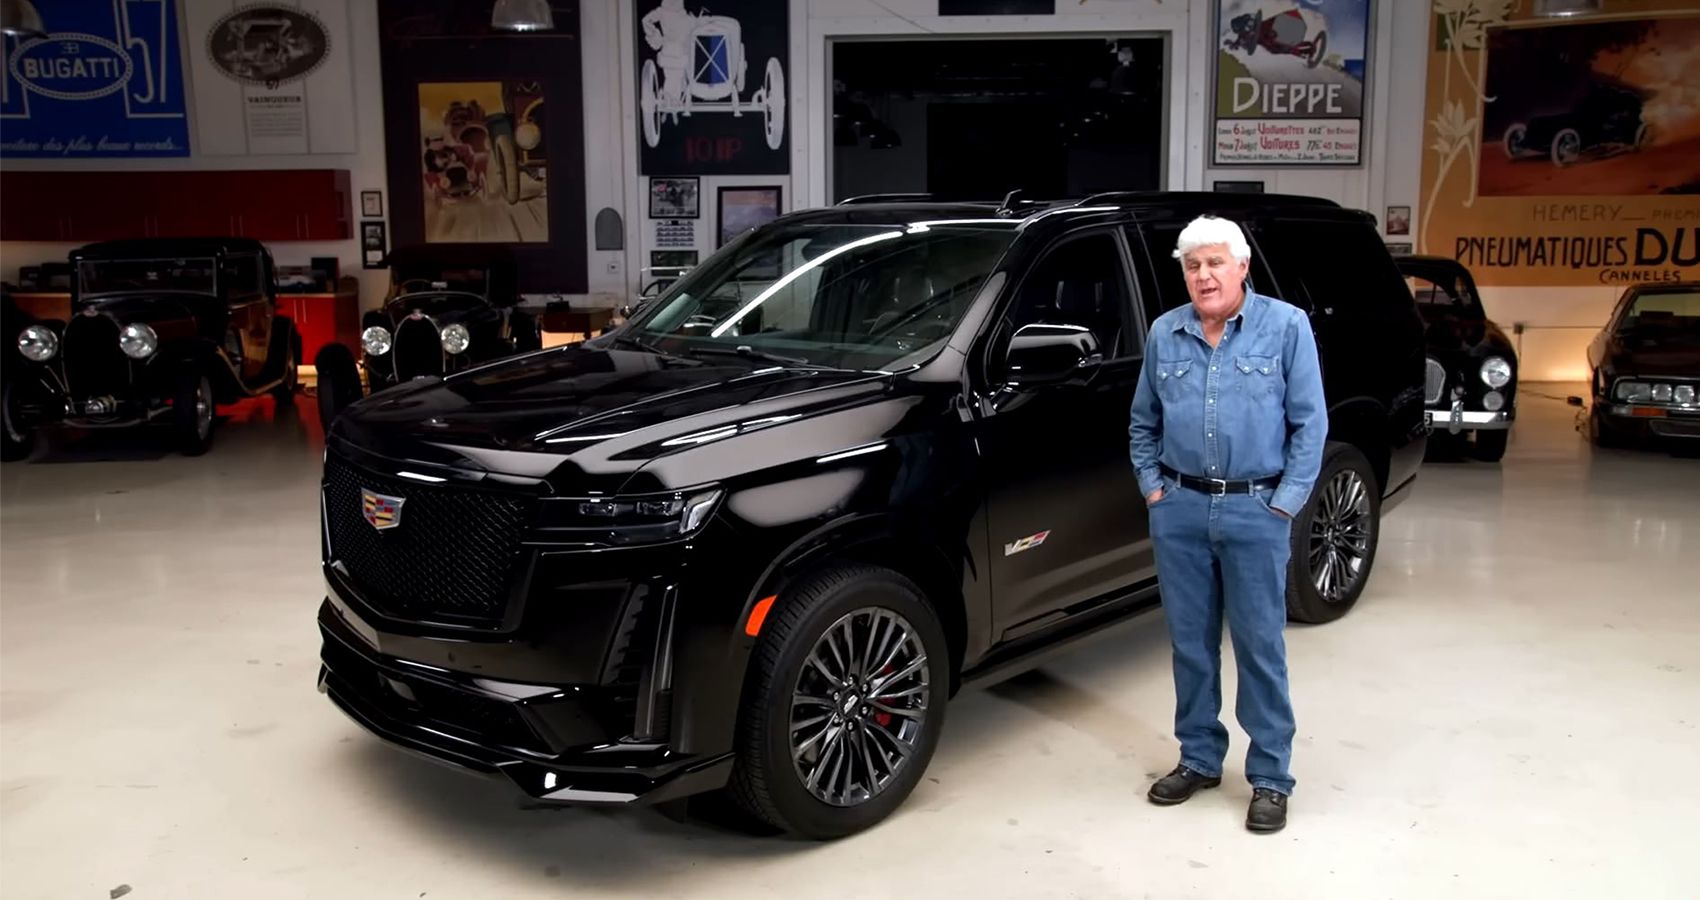 Jay Leno thinks the new Cadillac Escalade V is unbelievable.